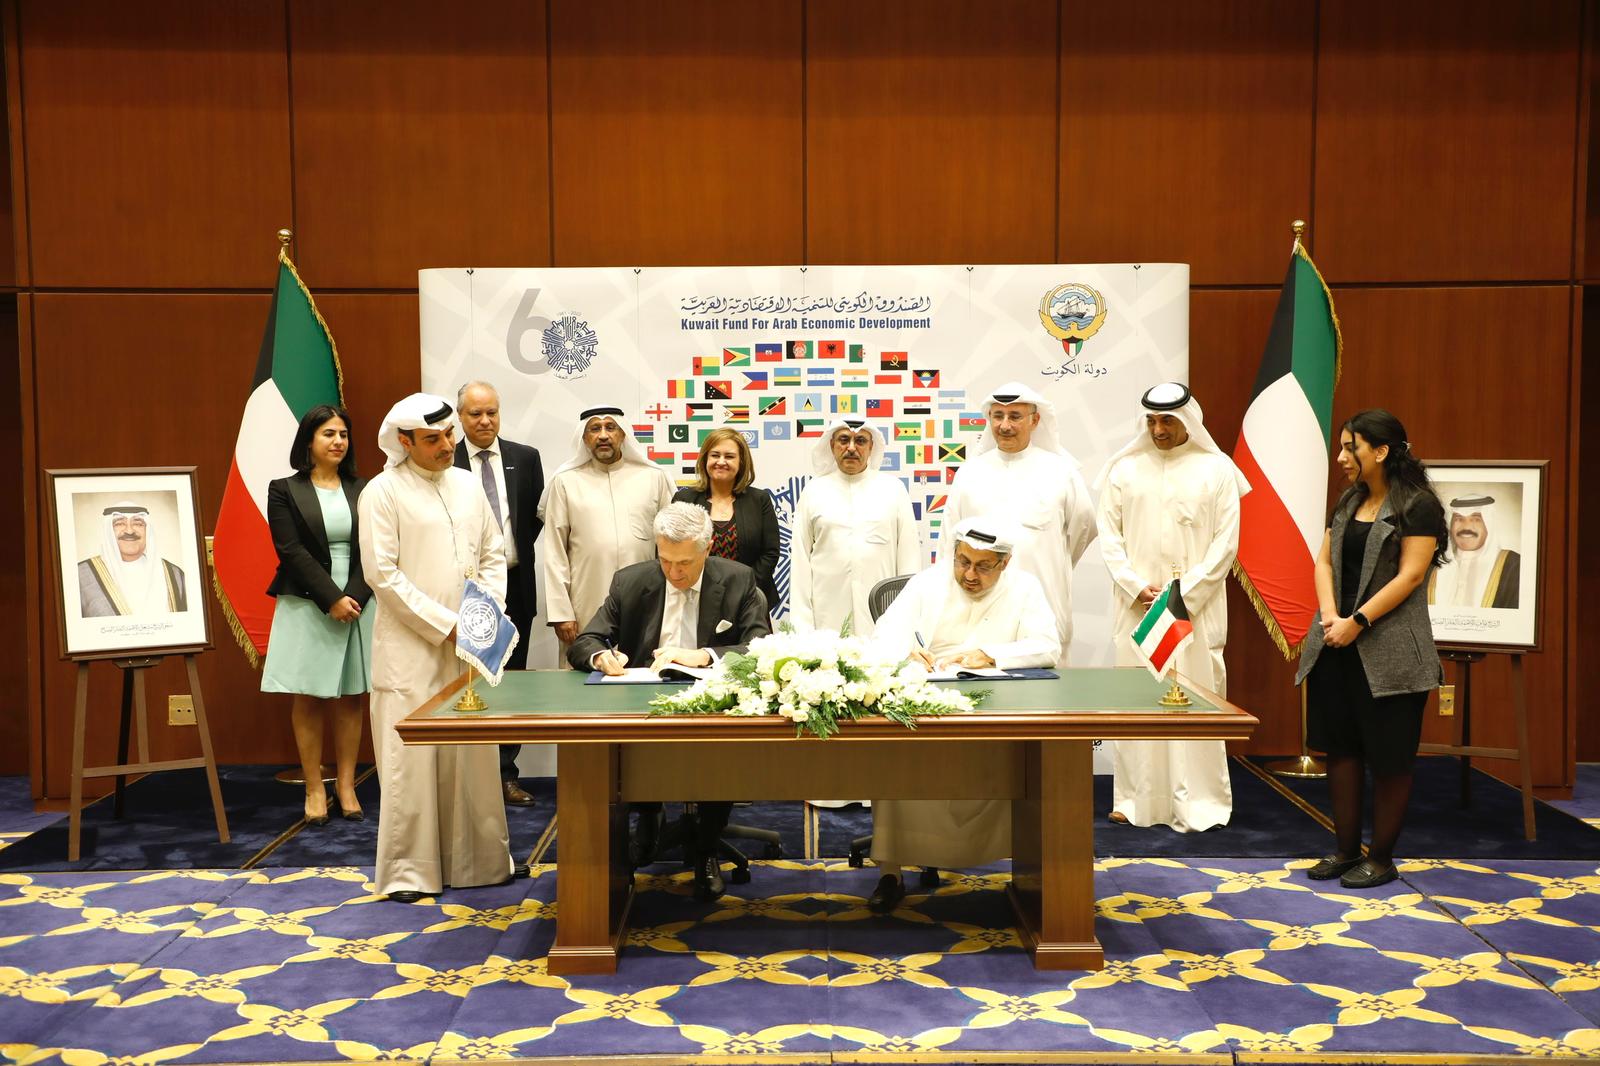 Kuwait Fund for Arab Economic Development (KFAED) inked with the UN Higher Commissioner for Refugees